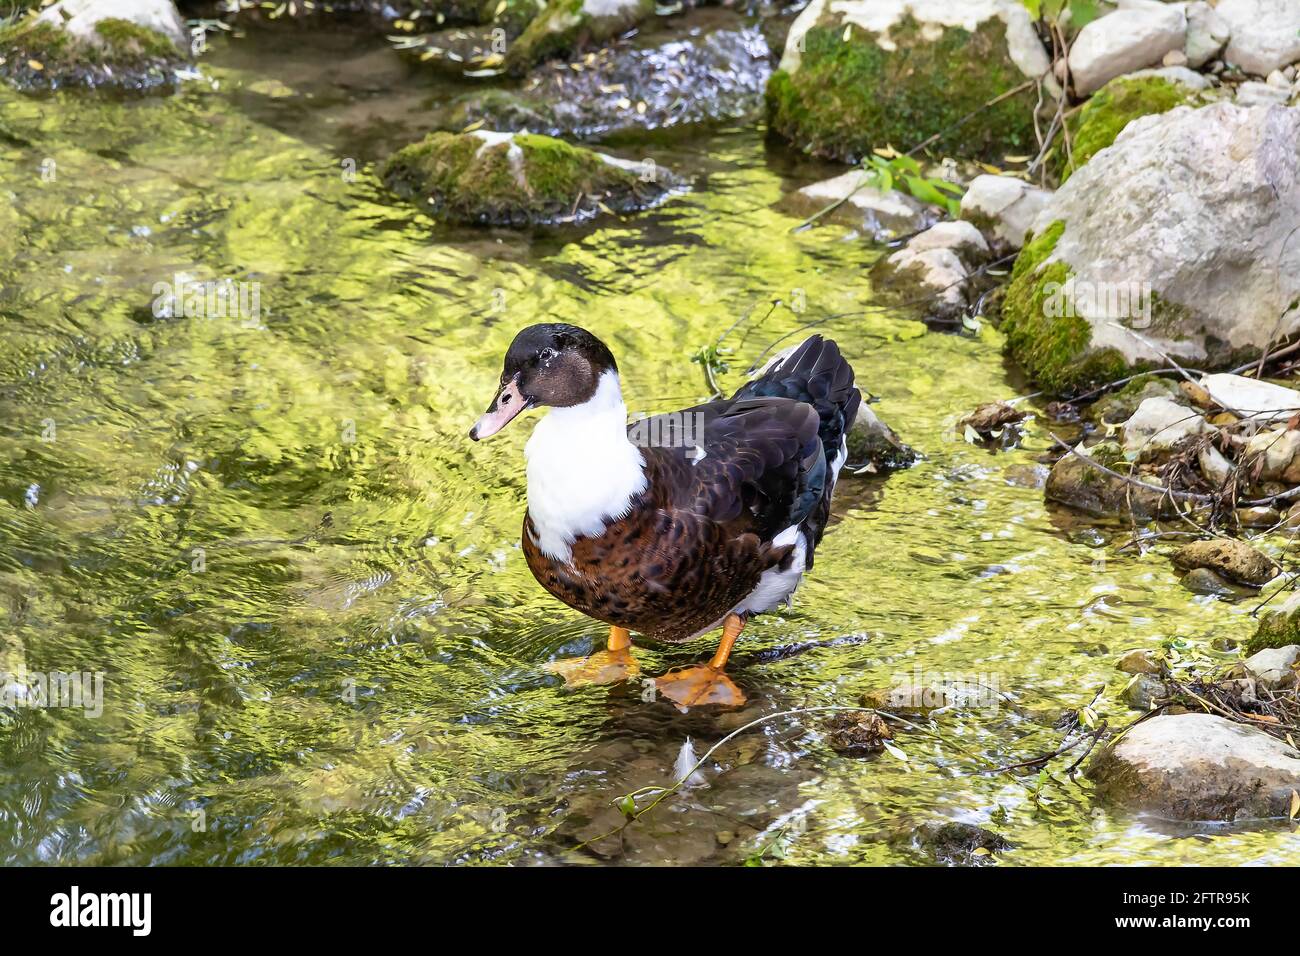 Duclair Duck in the Cerezuelo River in the town of Cazorla. The Duclair Duck is a dual-purpose breed of duck named after the town of Duclair in Norman Stock Photo